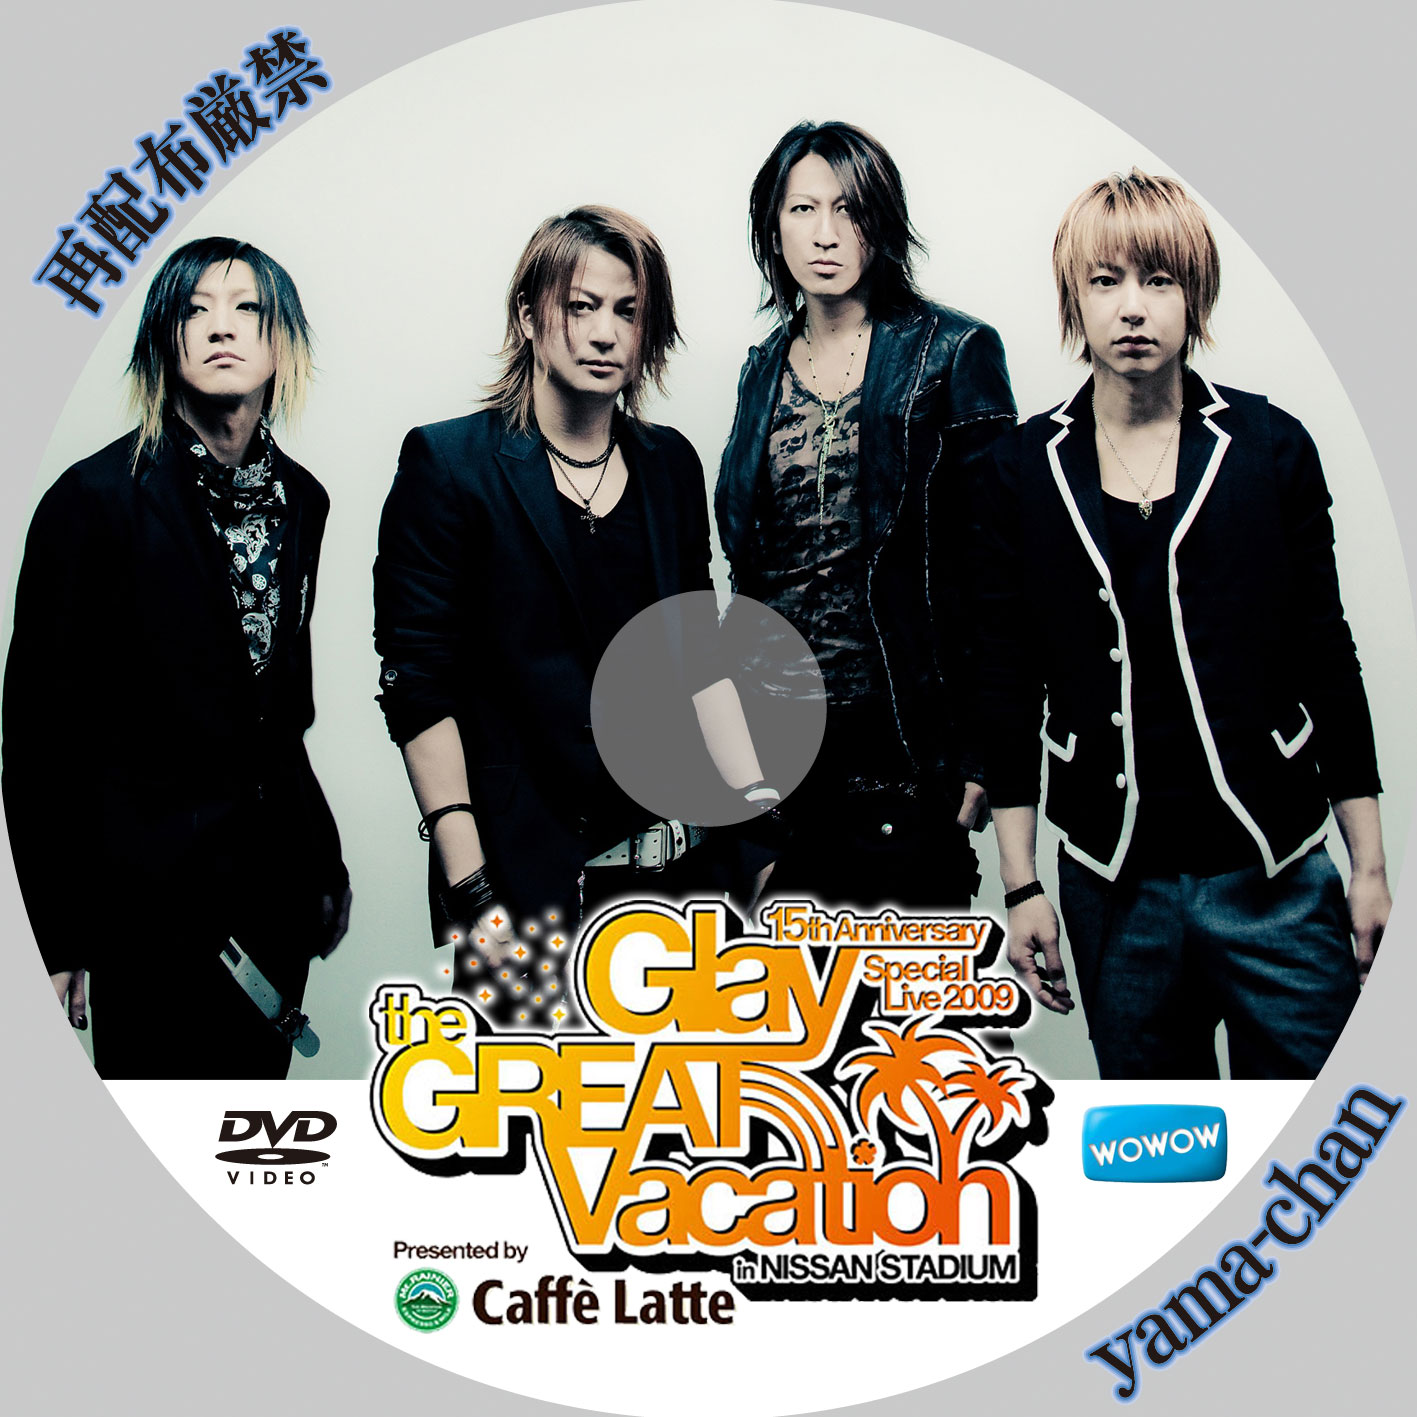 GLAY 15th anniversary special live 2009 - ミュージック